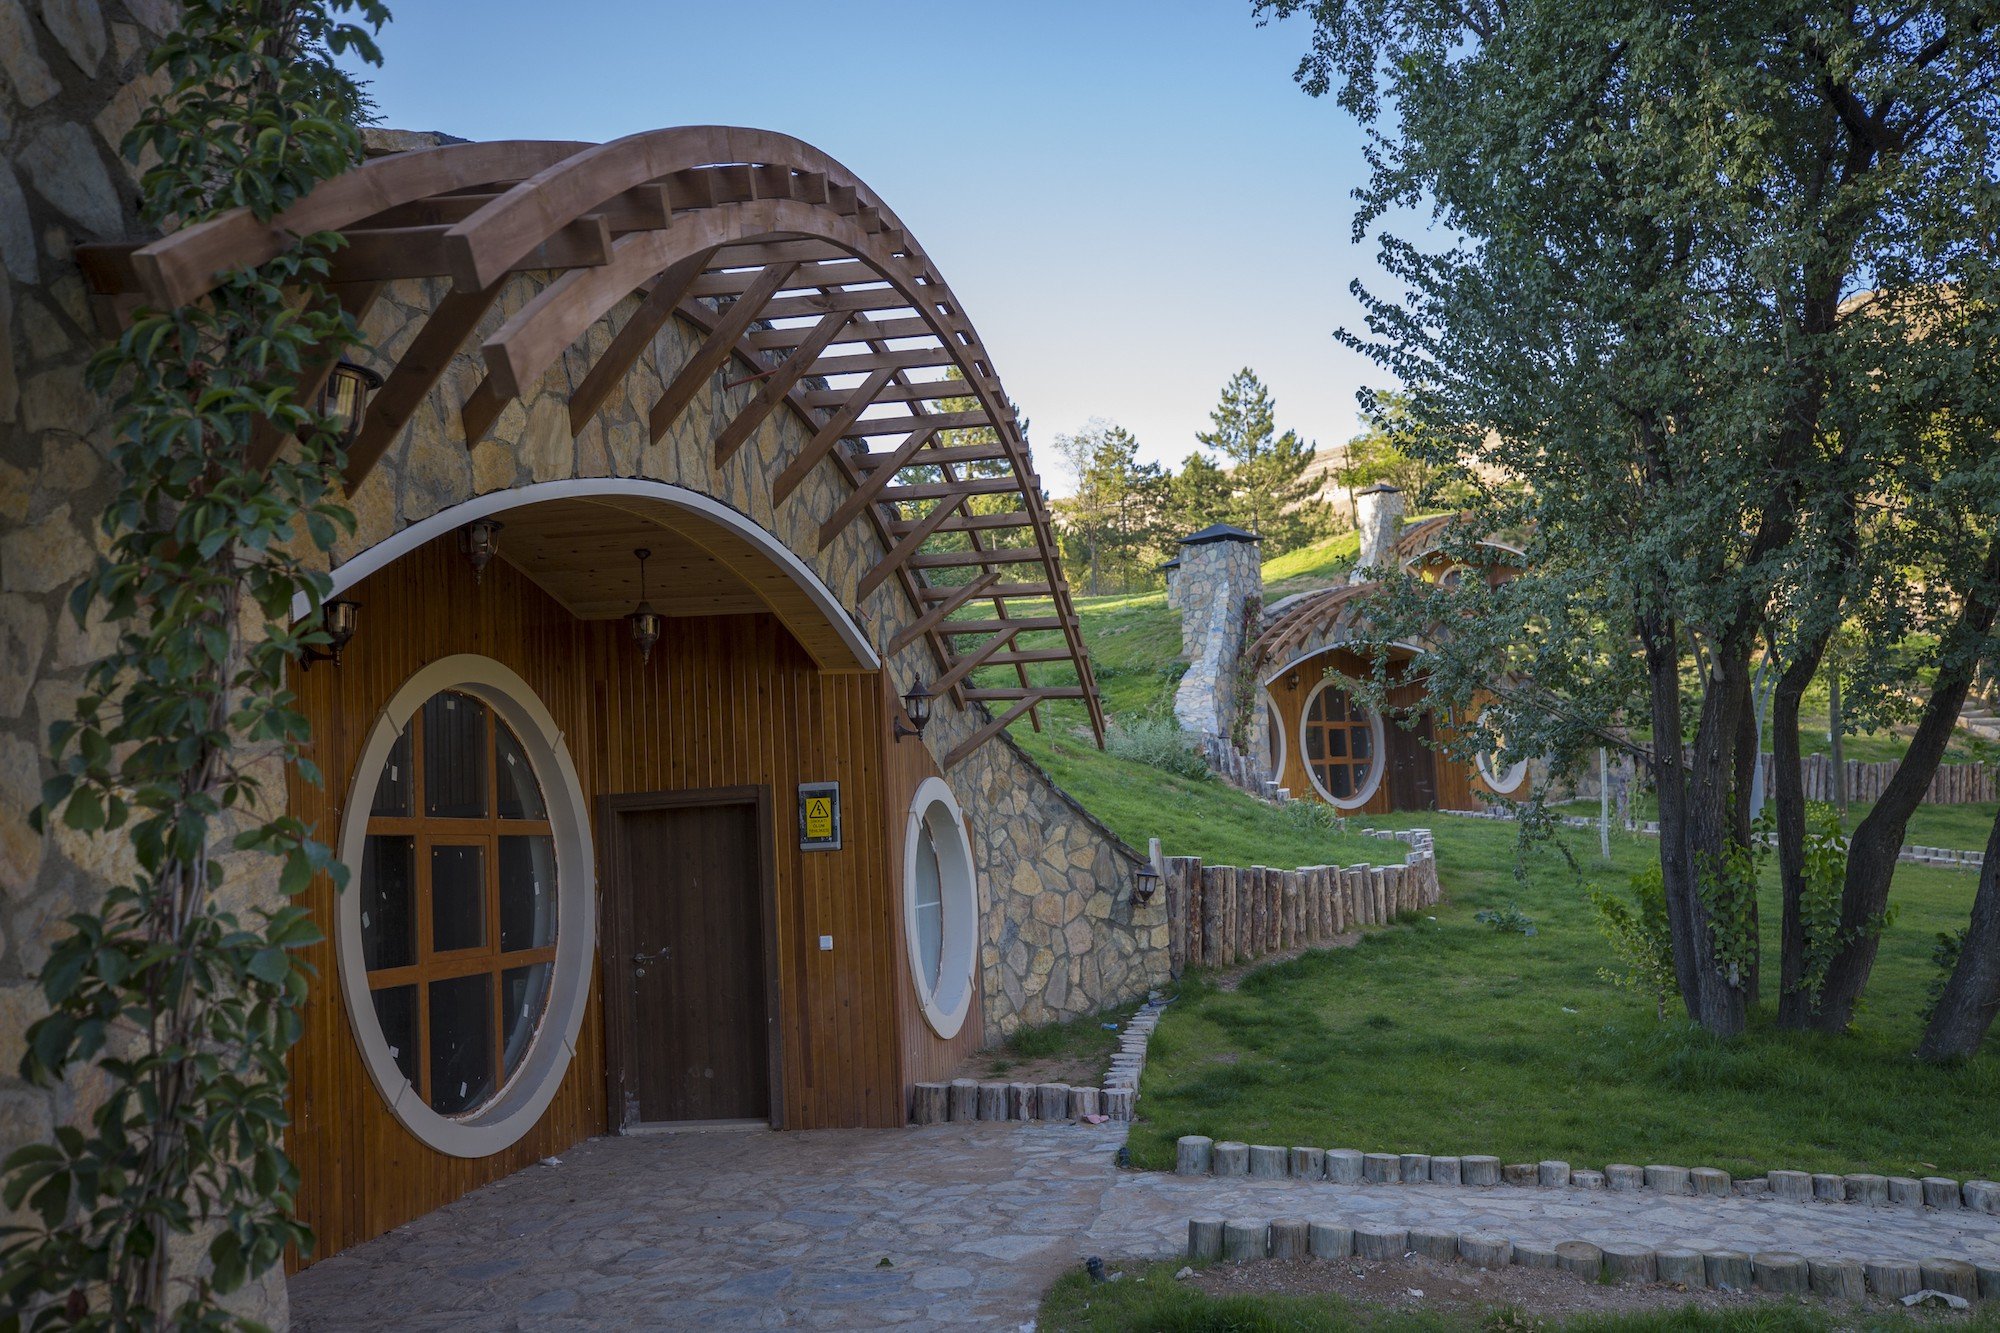 Houses, built with the inspiration from Hobbit houses in the movie "Lord Of The Rings"